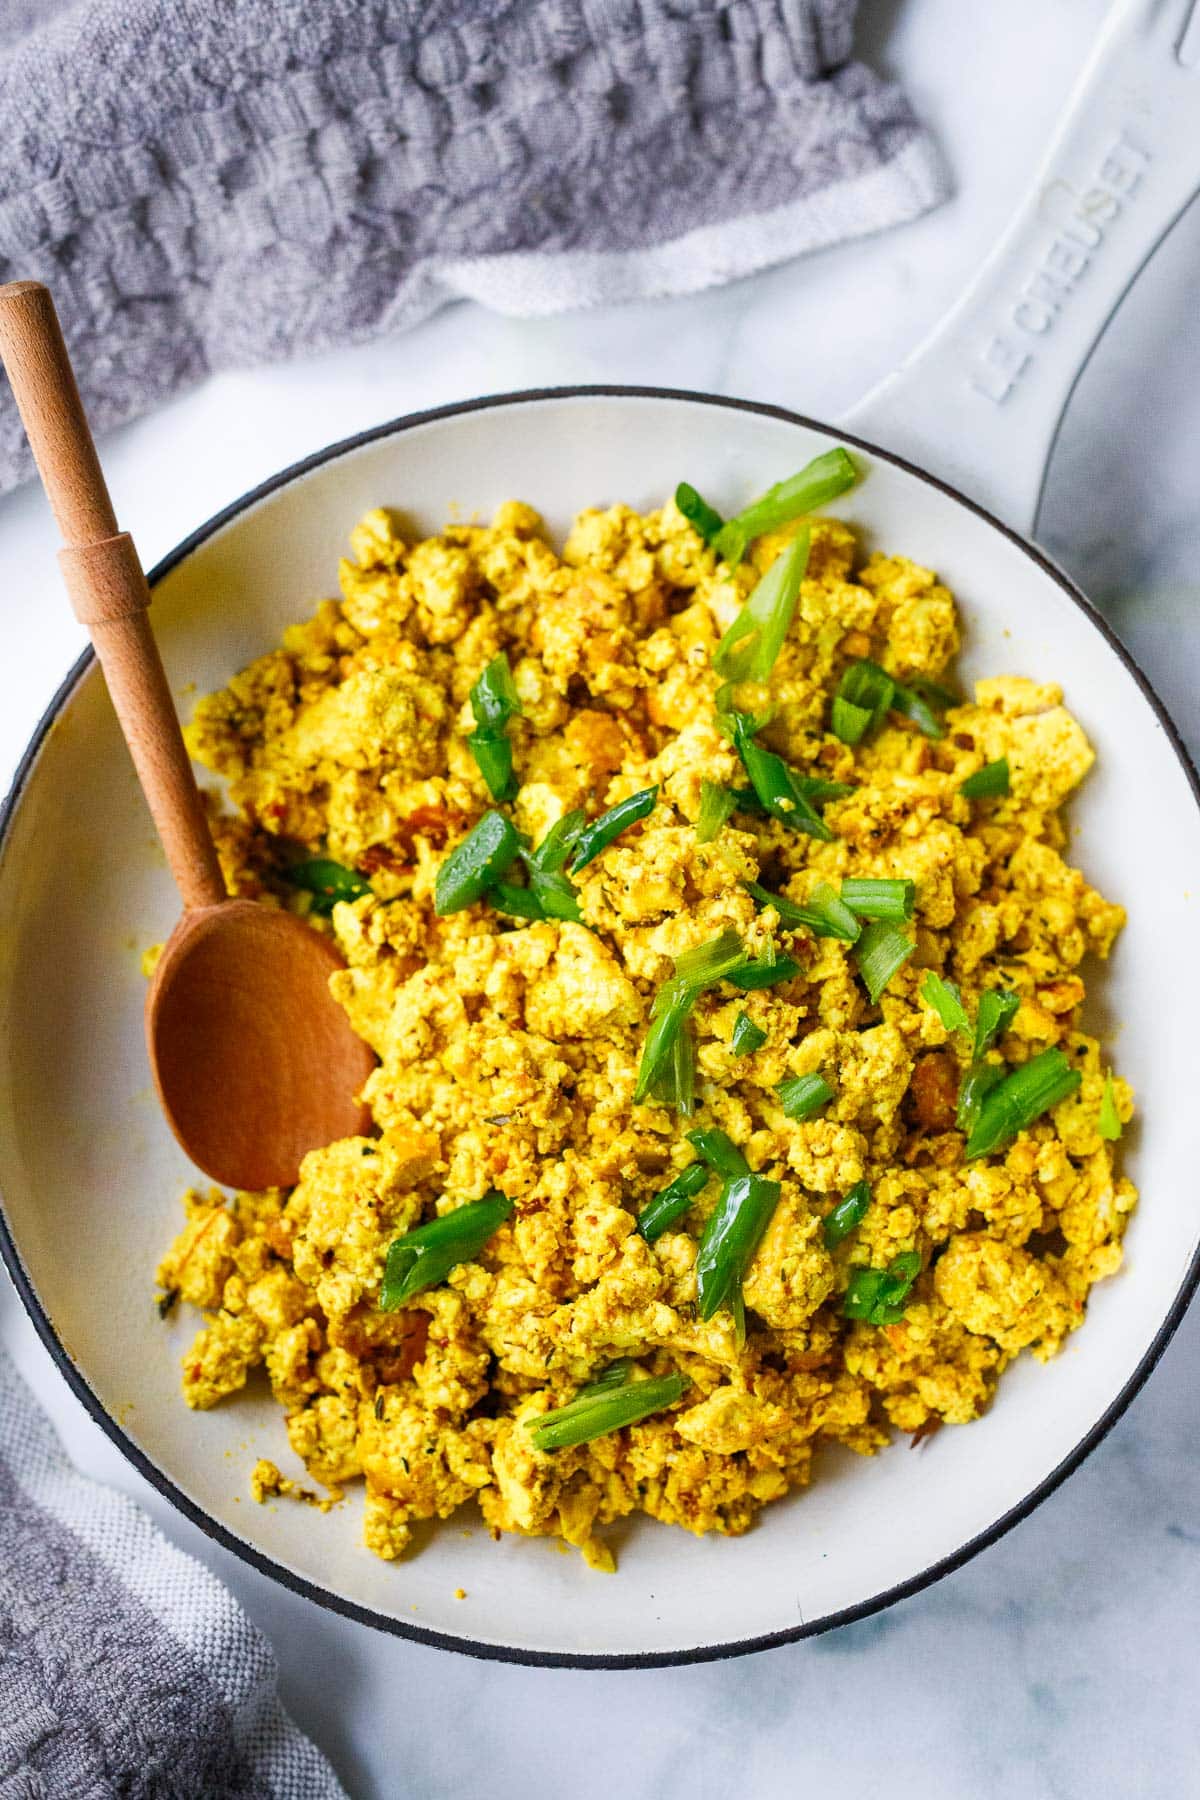 This Tofu Scramble recipe is so delicious! Load it up with seasonal veggies that you already have on hand, or keep it plain and simple- either way, you'll love this high-protein vegan breakfast. Make it in 15 minutes!